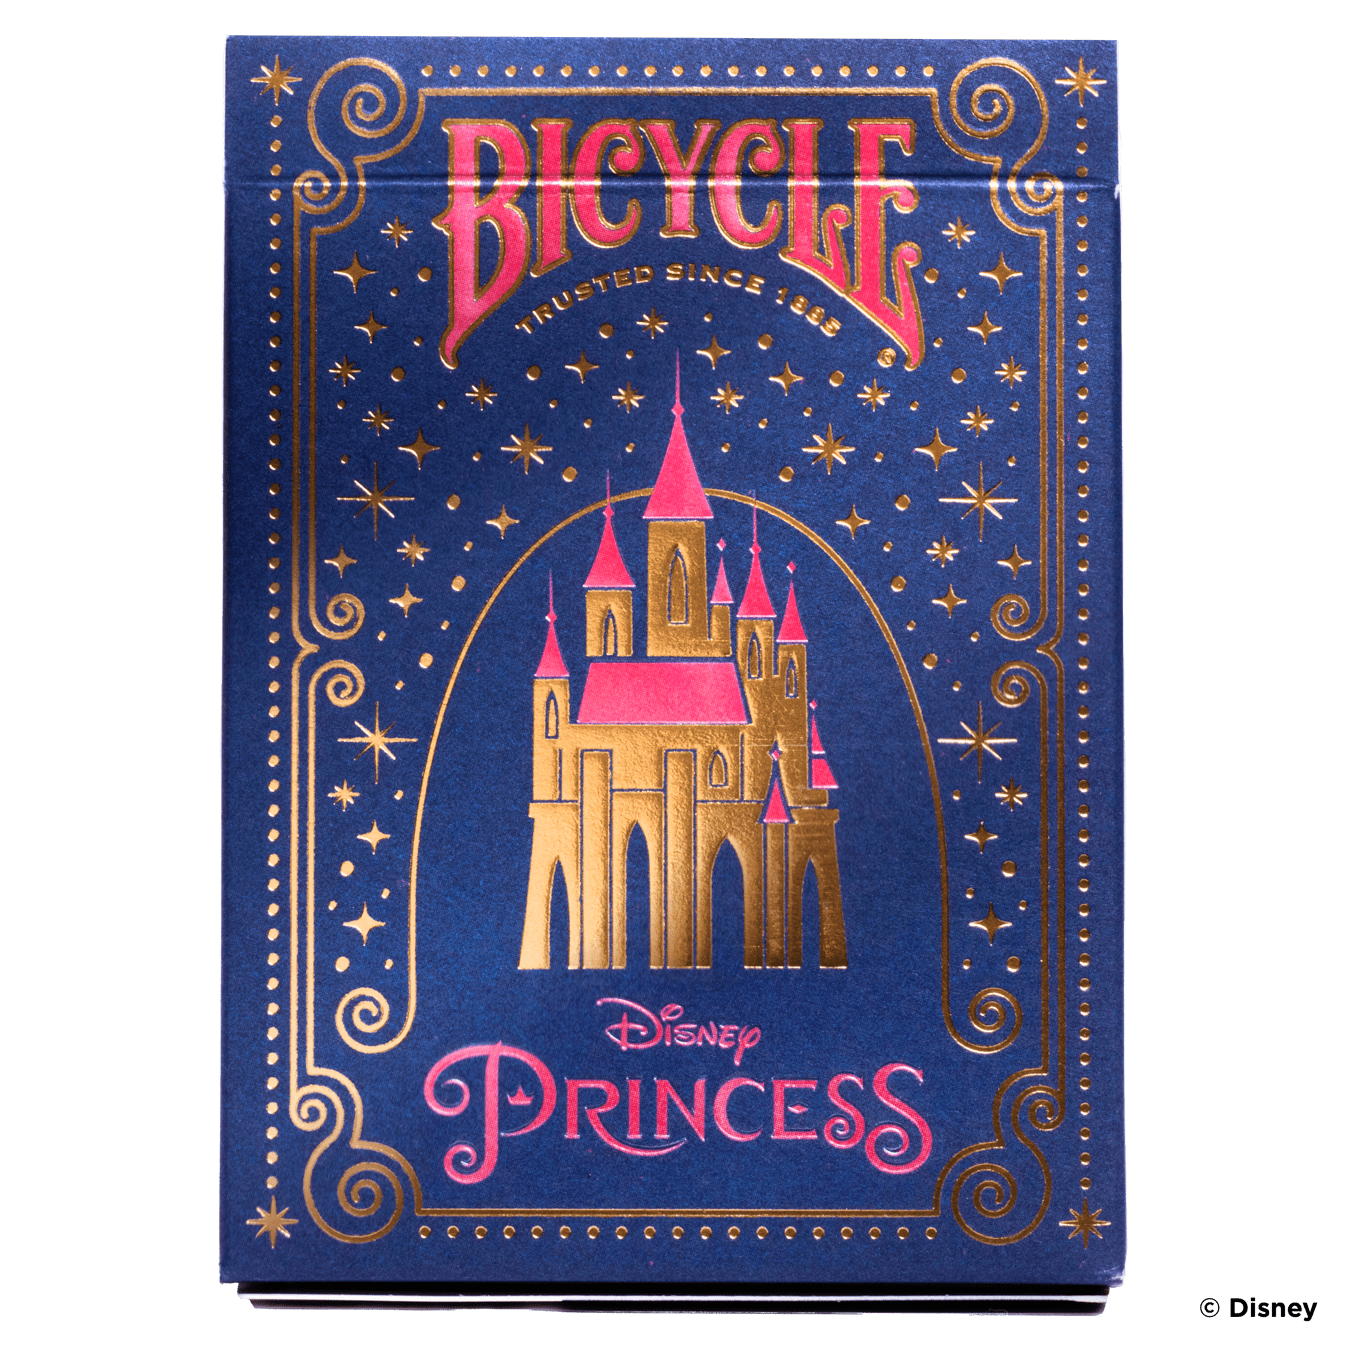 Disney Princess Inspired Playing Cards by Bicycle- Navy